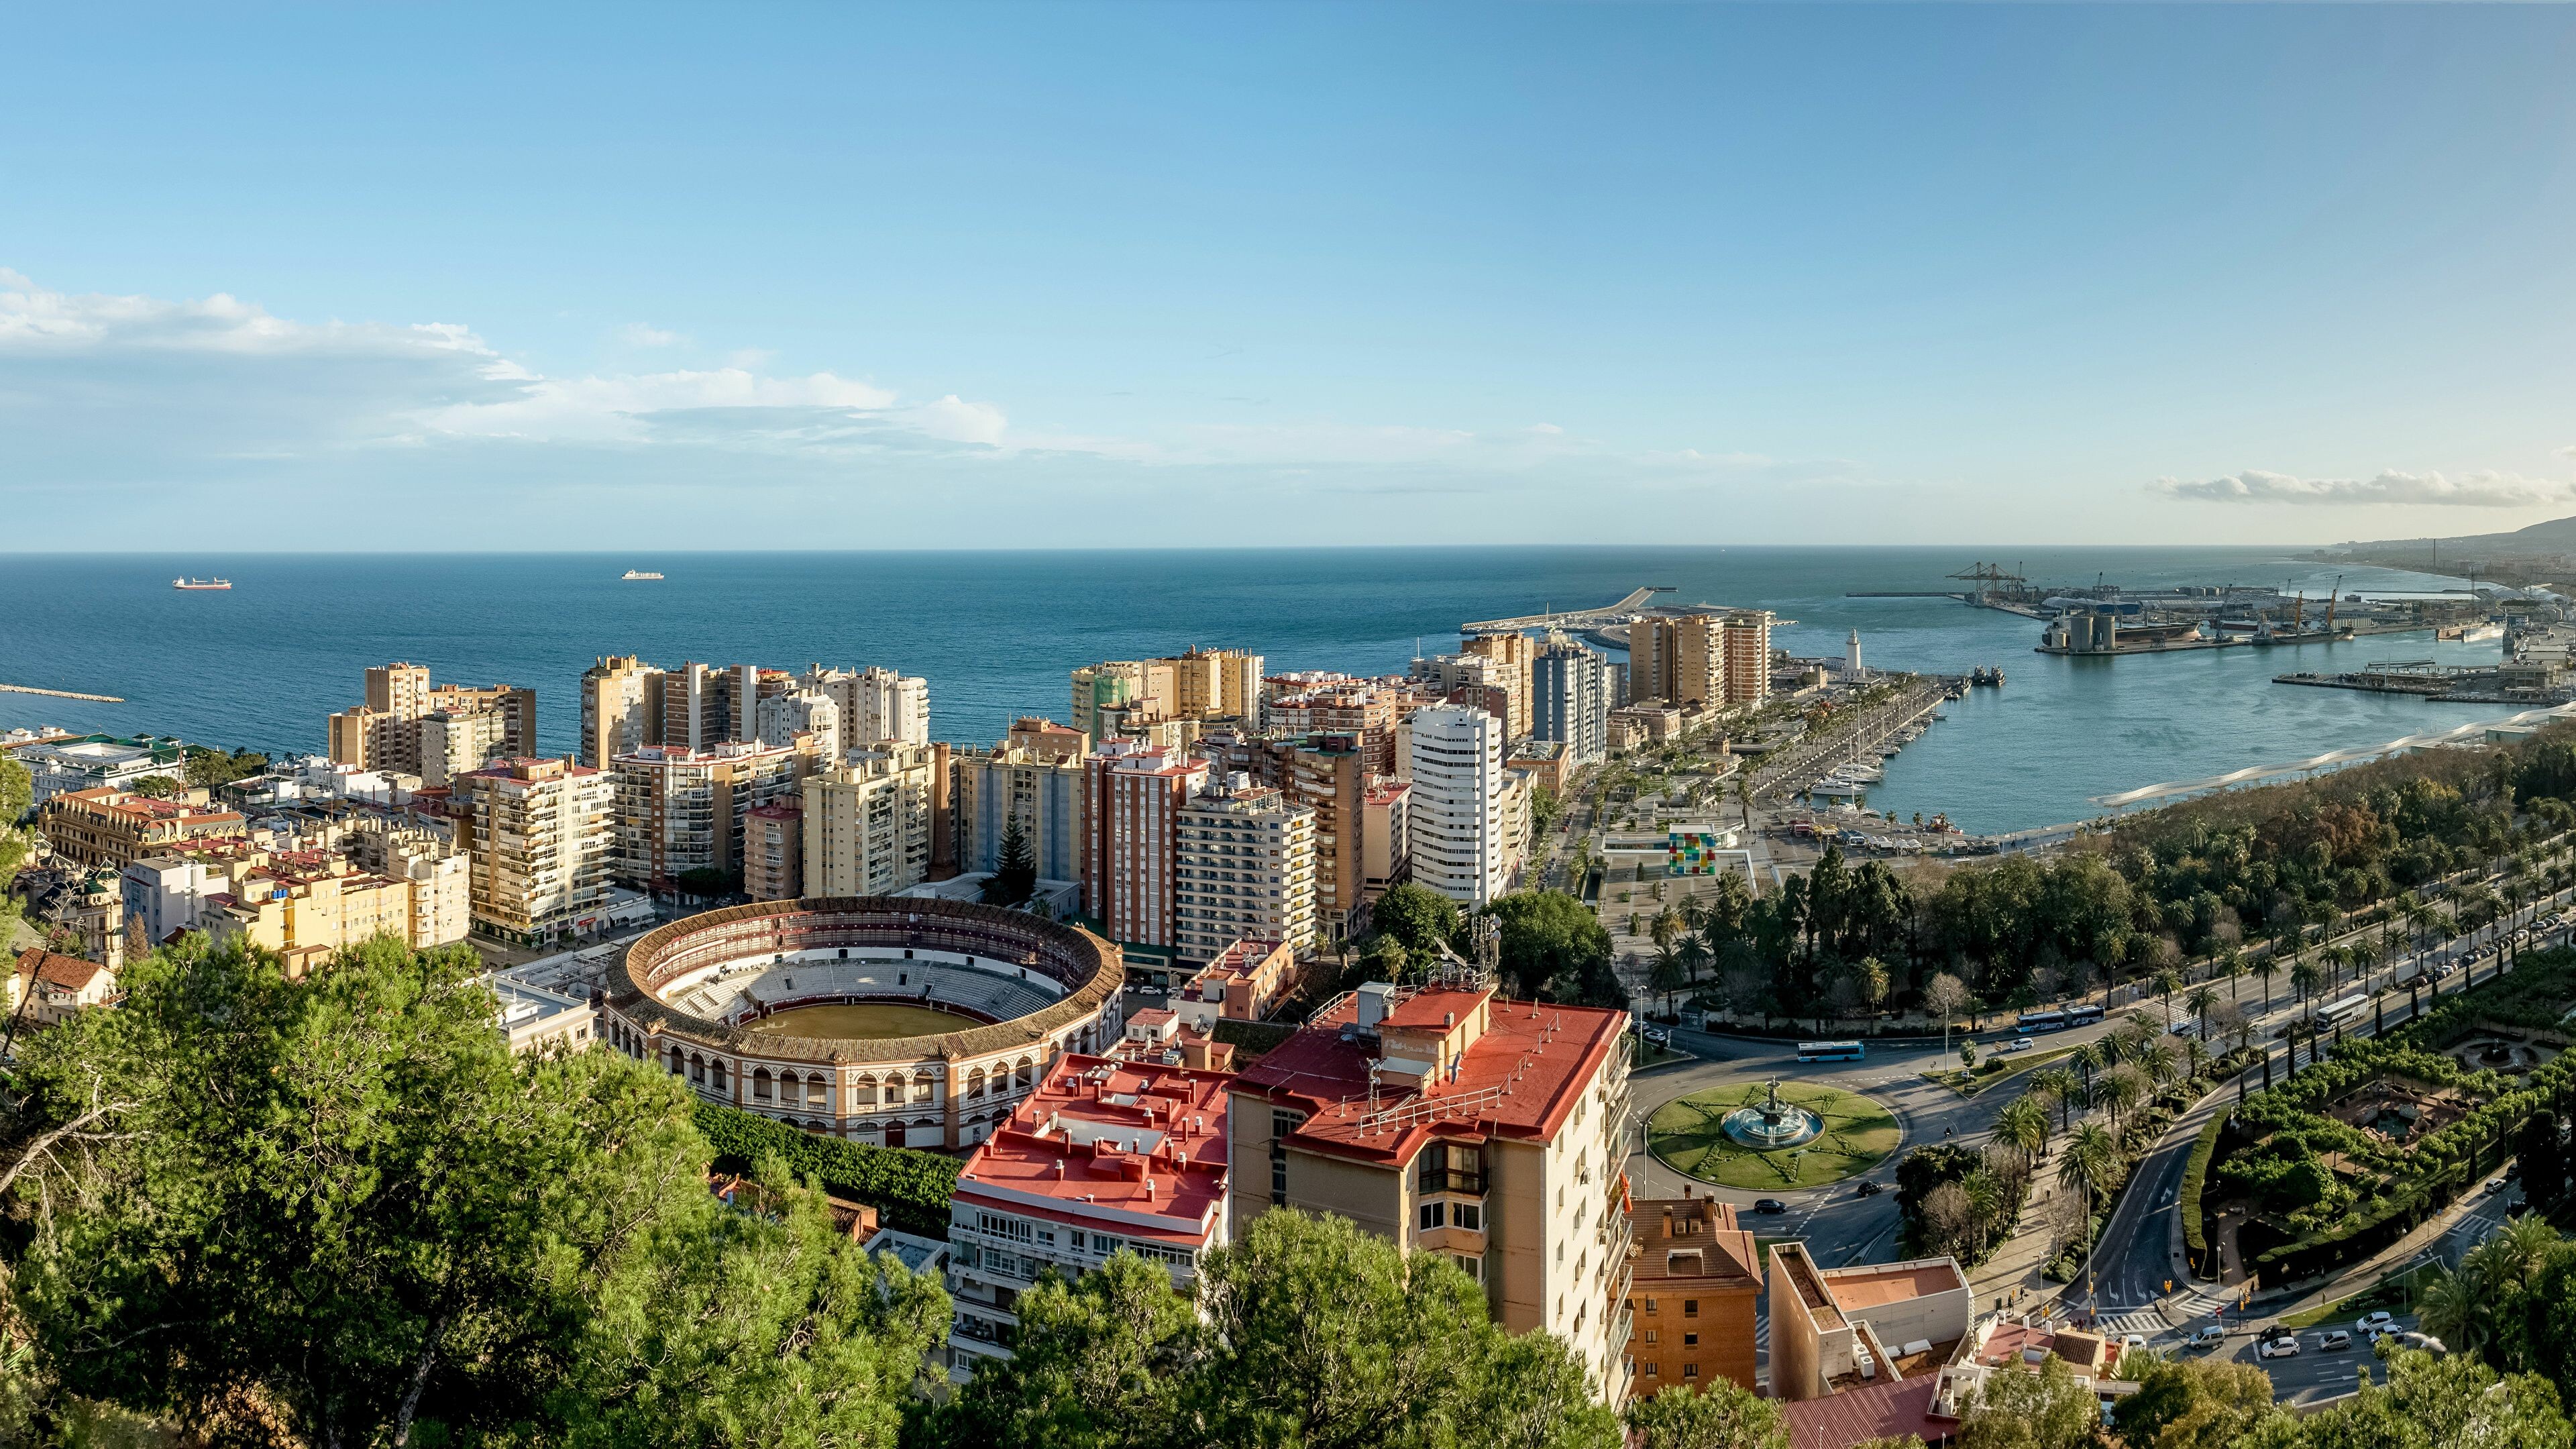 Spain: Malaga, A country primarily located in southwestern Europe. 3840x2160 4K Wallpaper.